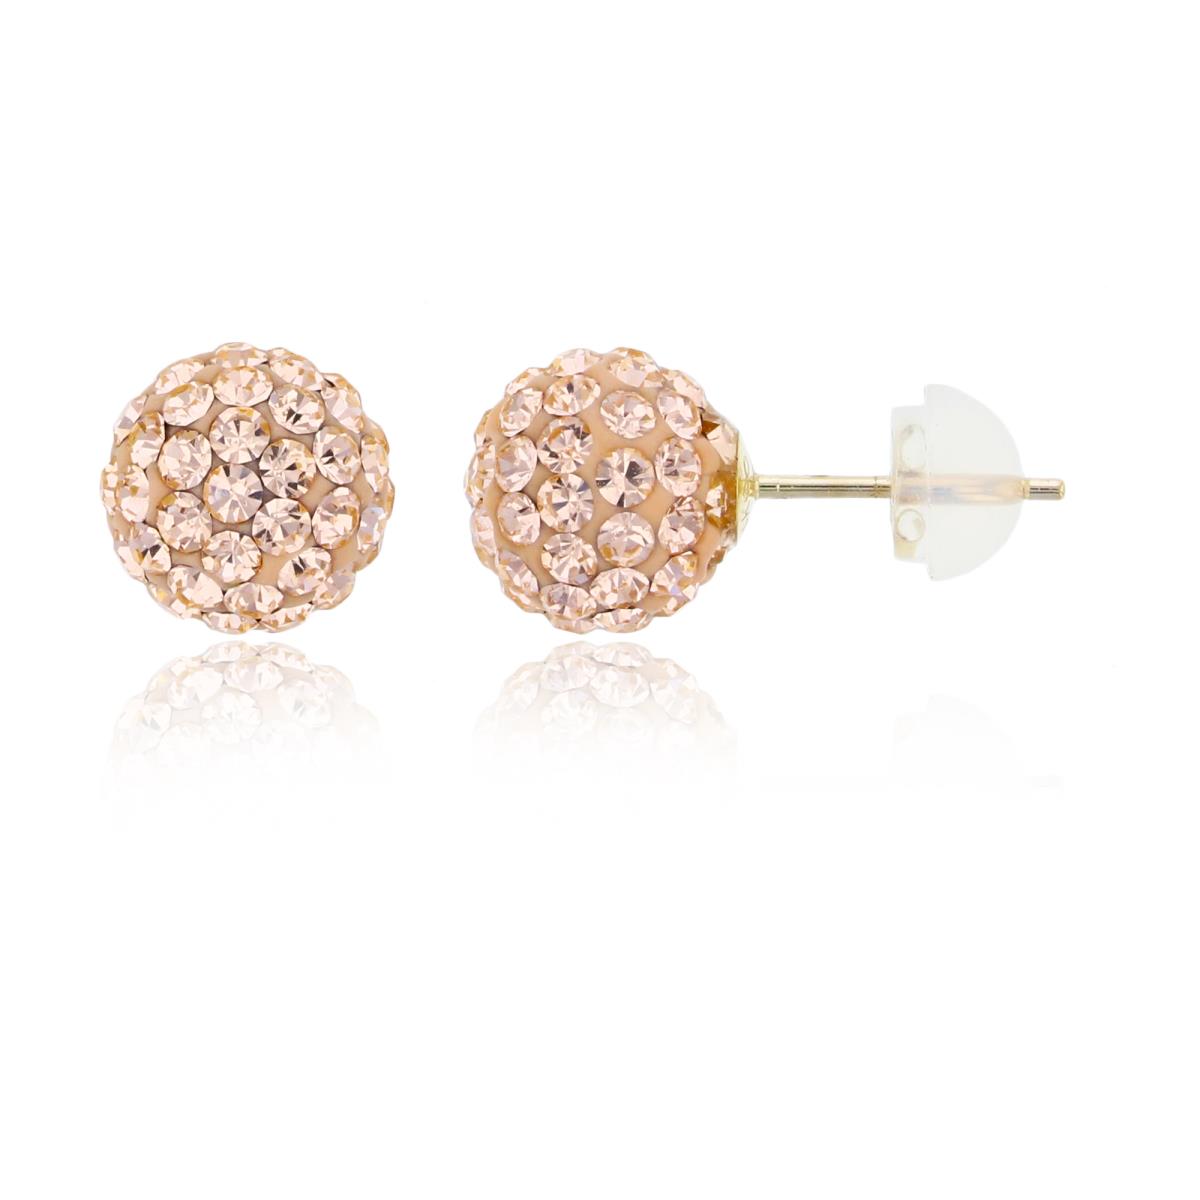 14K Yellow Gold 8x8mm Champagne Crystals Fireball Stud Earring